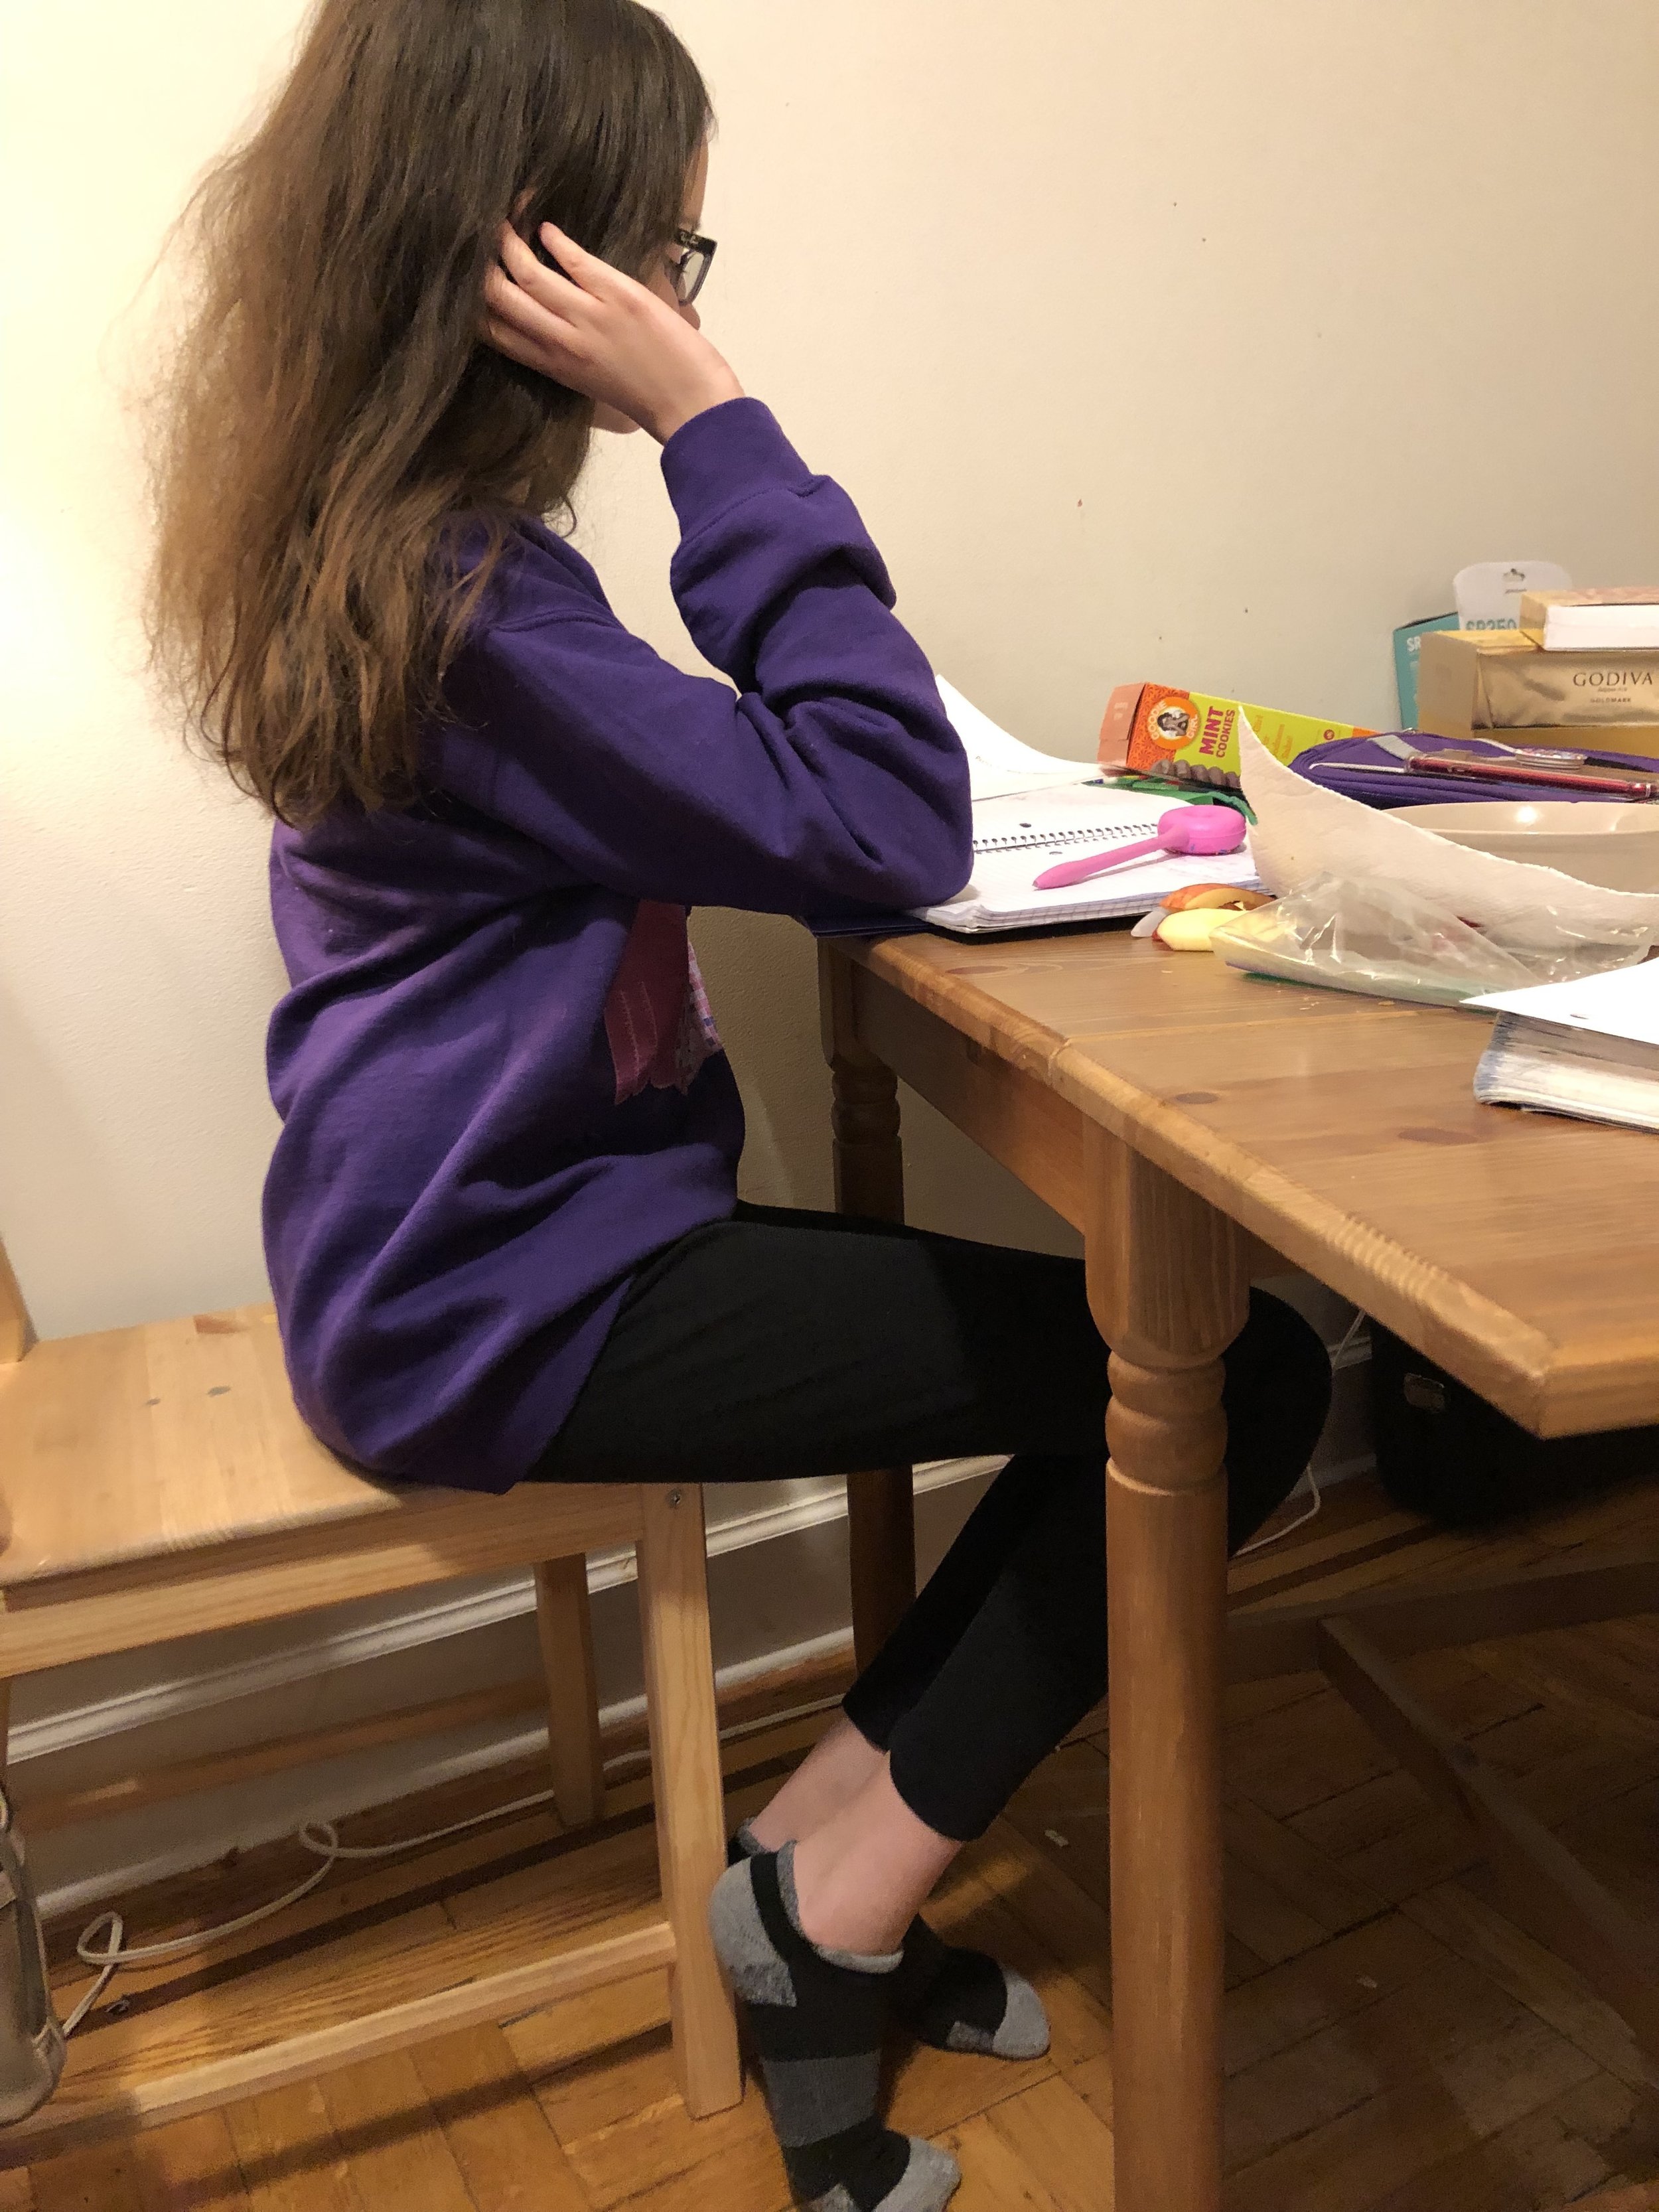 How To Sit In A Chair With Scoliosis? - Posture Tips